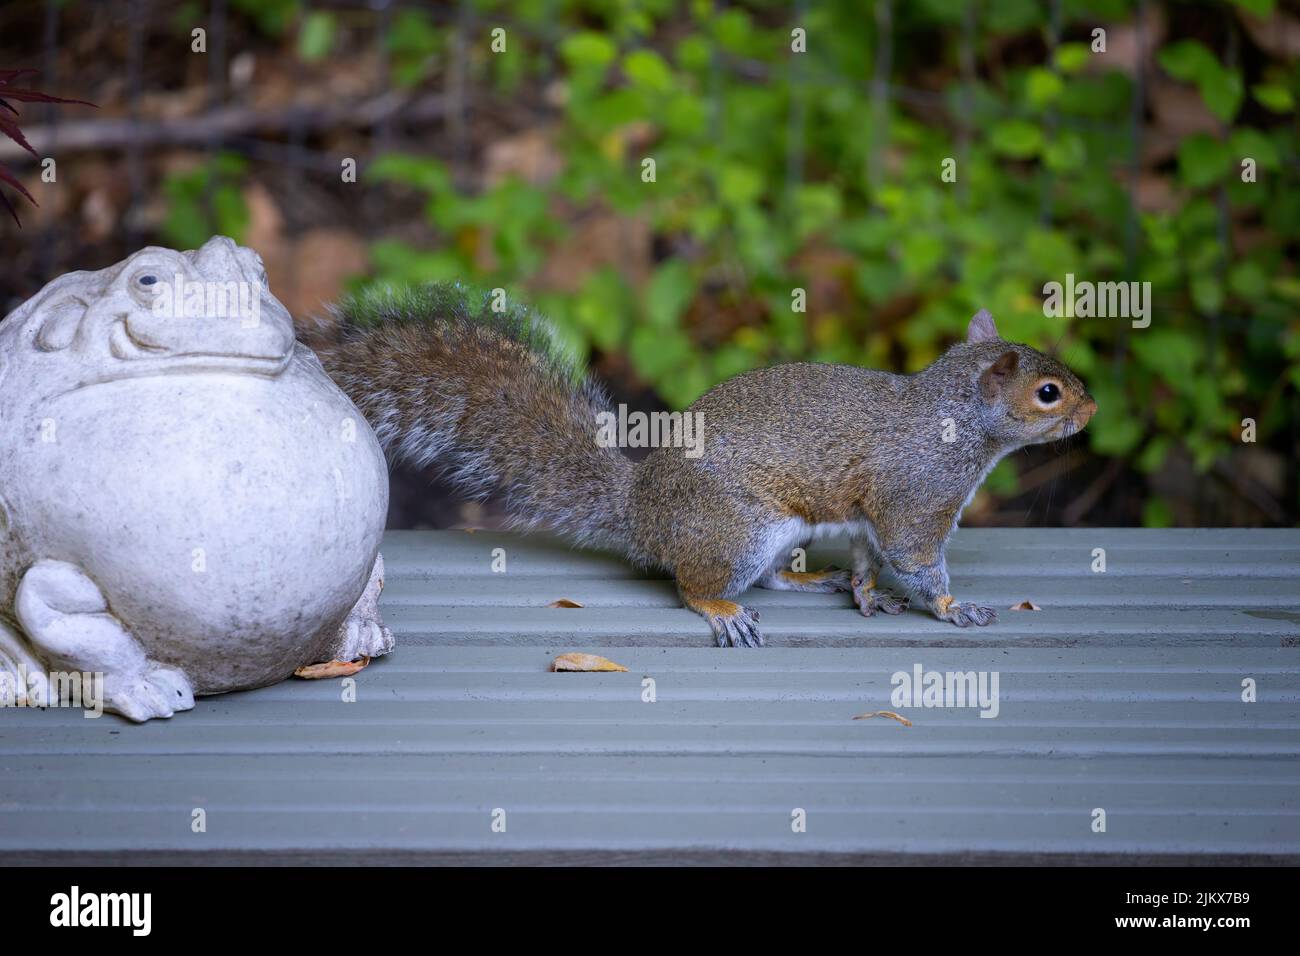 In a backyard a gray squirrel pauses on a small bence he is crossing Stock Photo